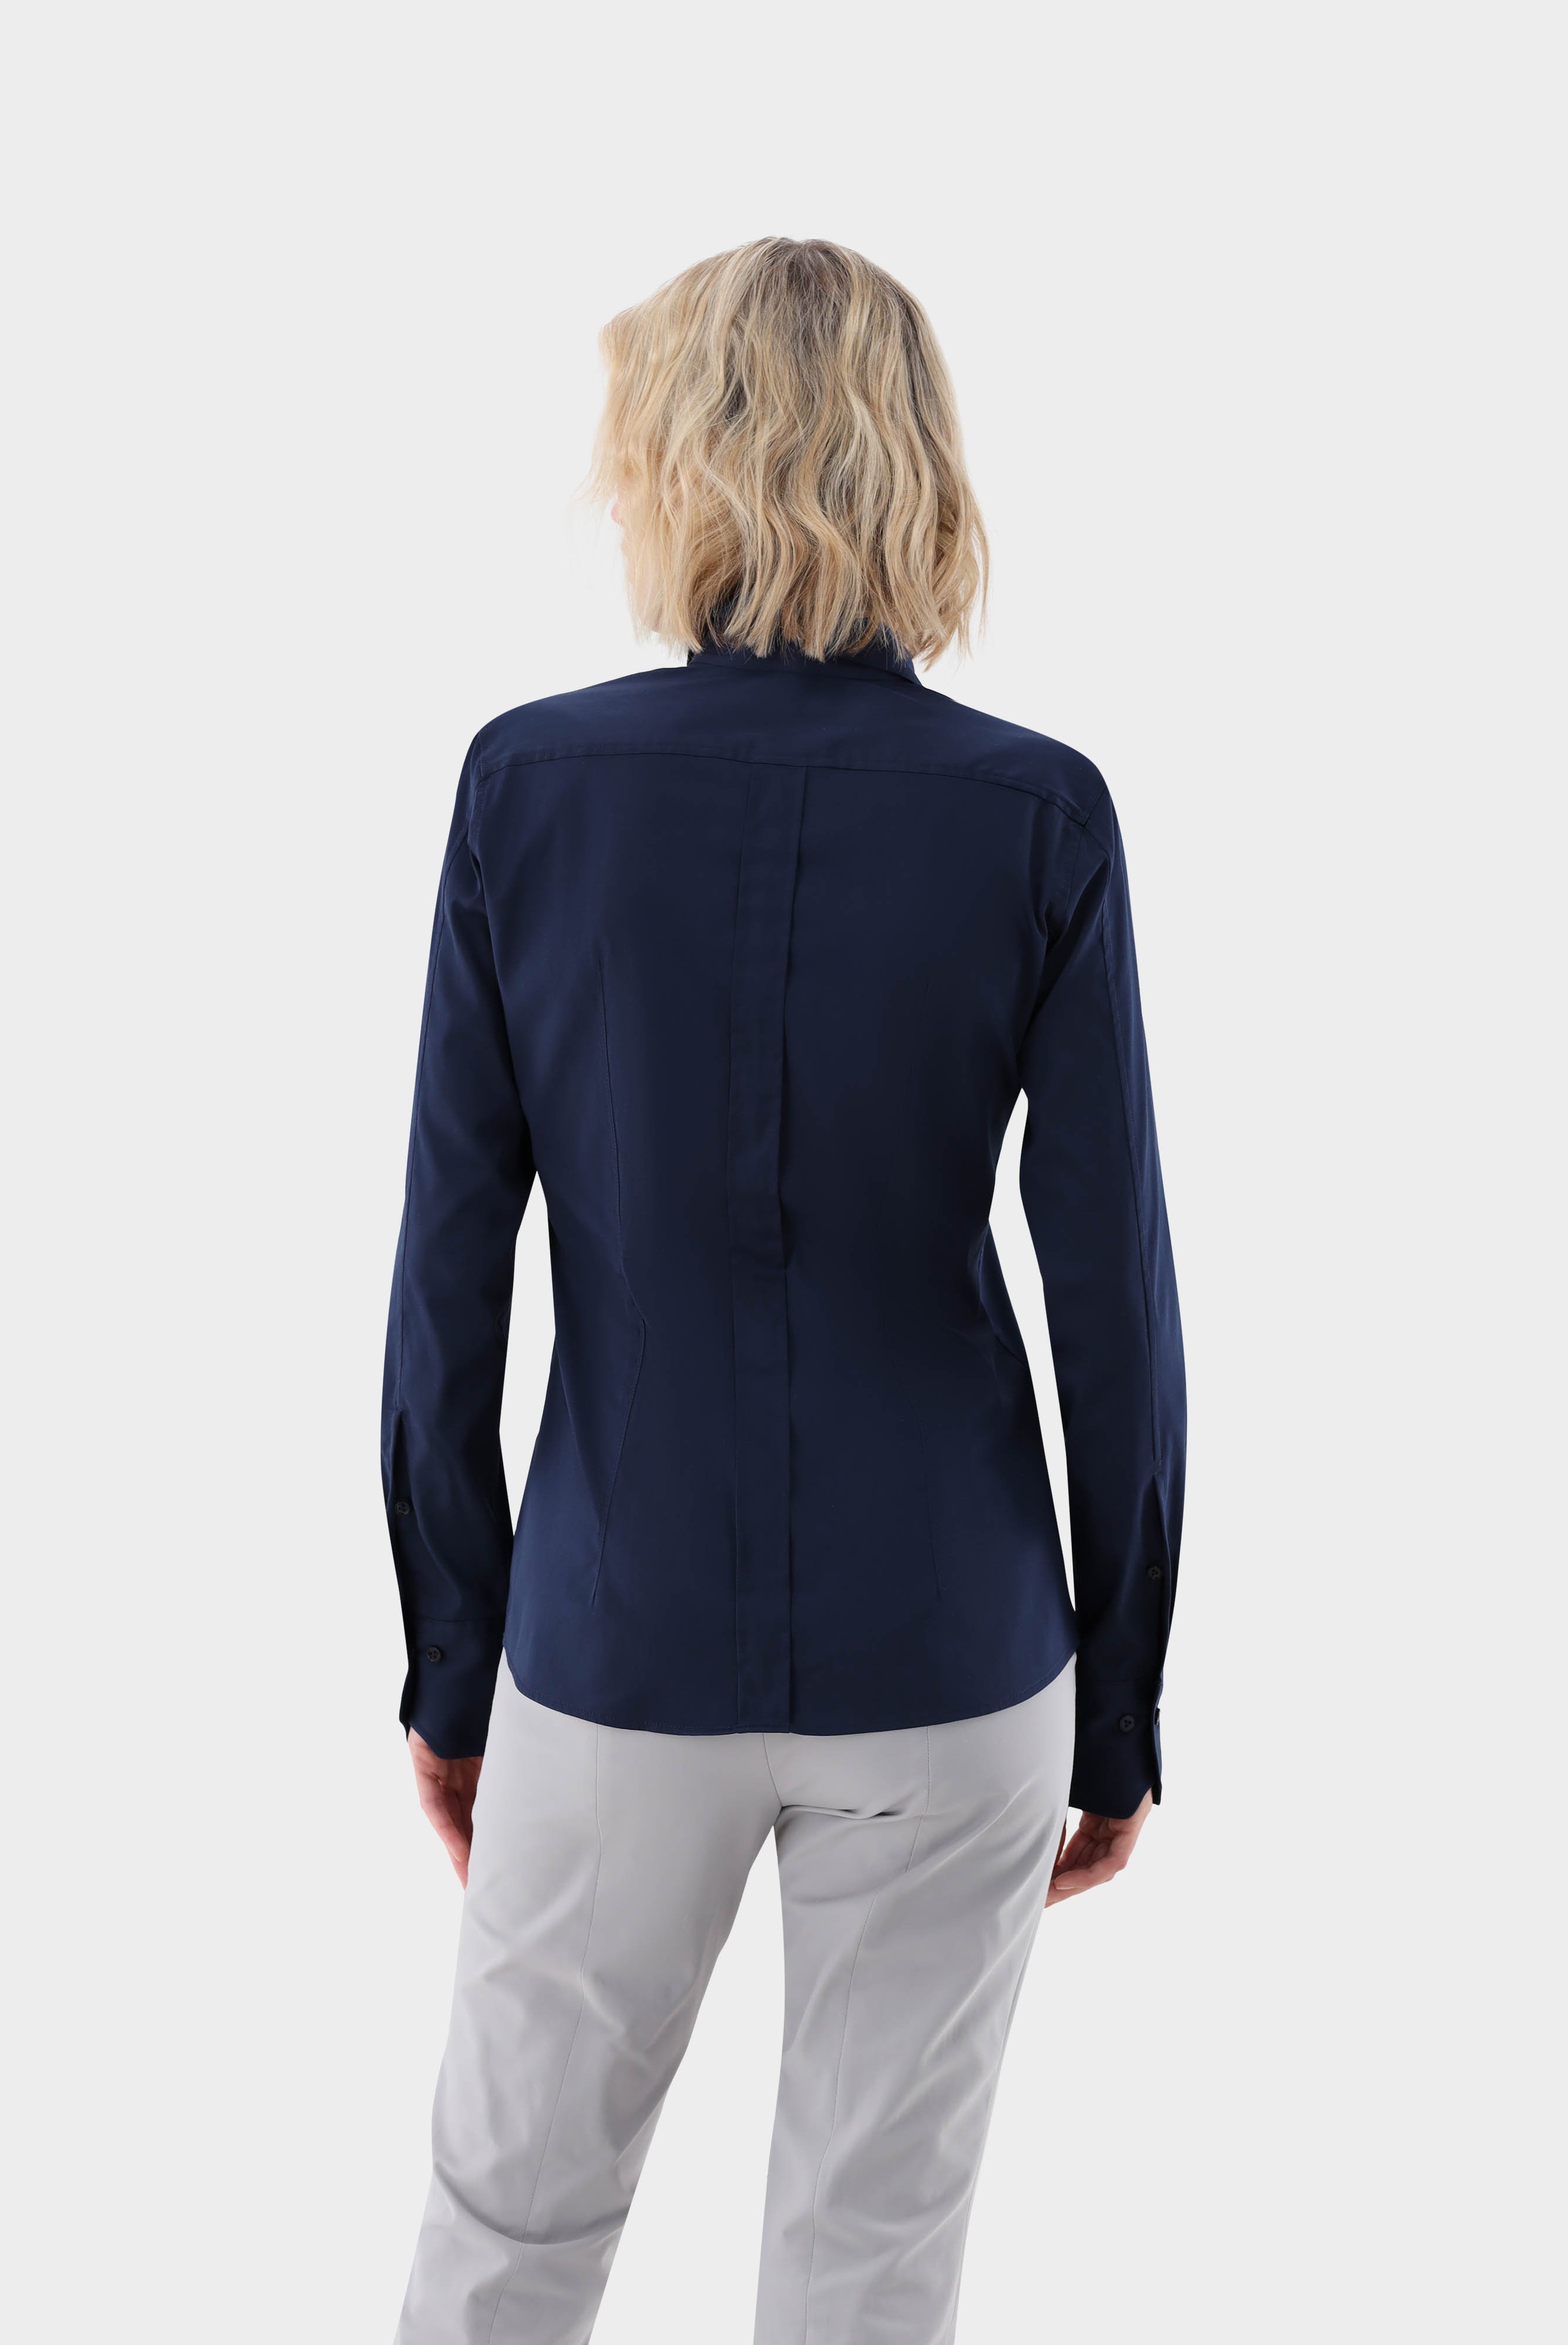 Business Blouses+Shirt Blouse with Stretch Slim Fit+05.5845.73.130830.780.48